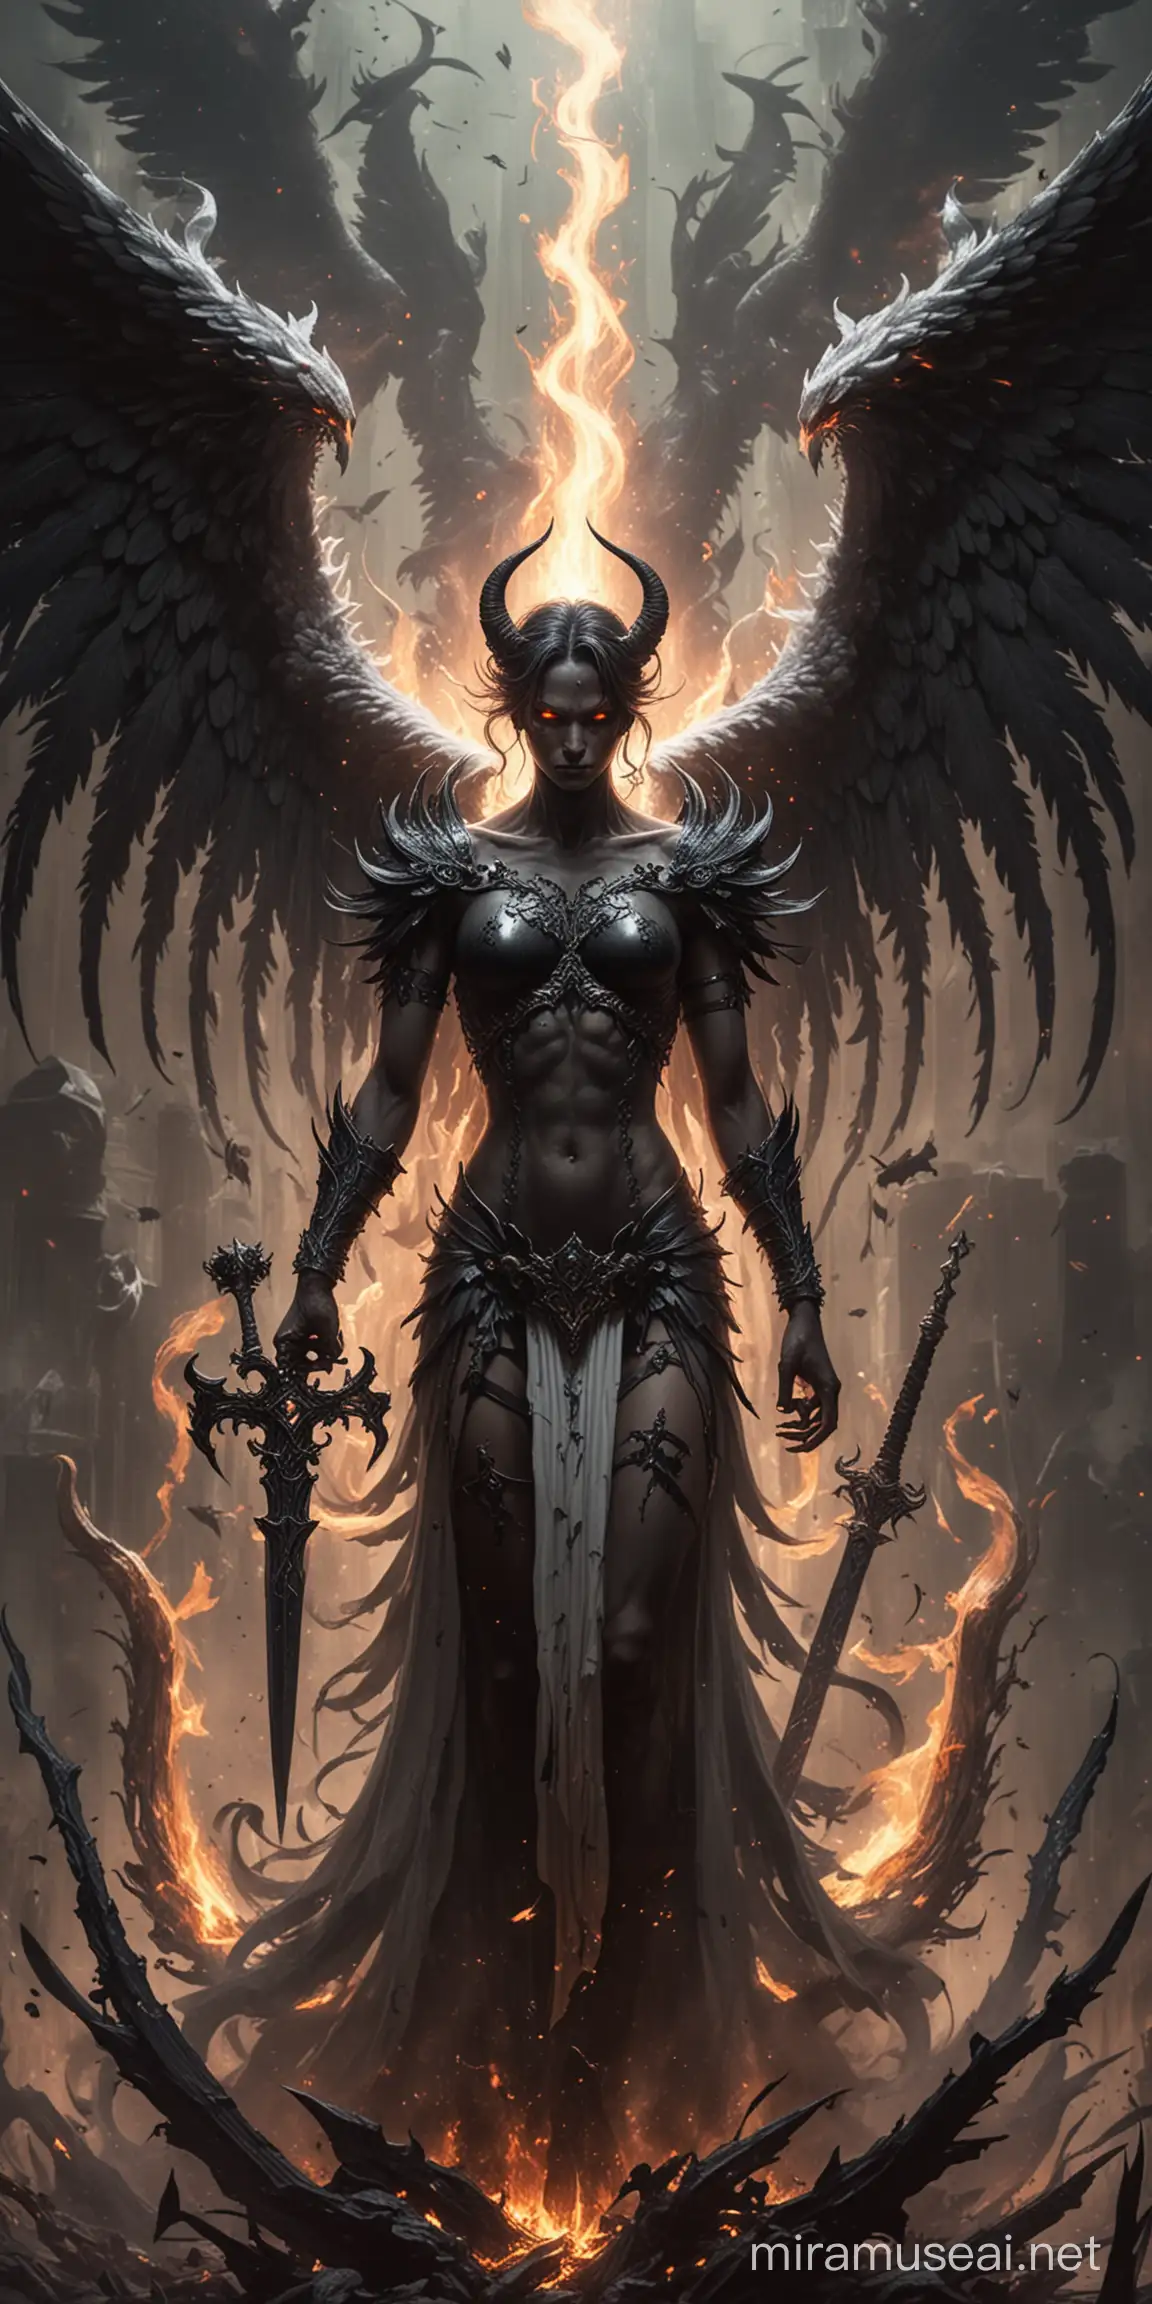 Epic Battle Between Dark Demon and White Angel with Magical Dagger